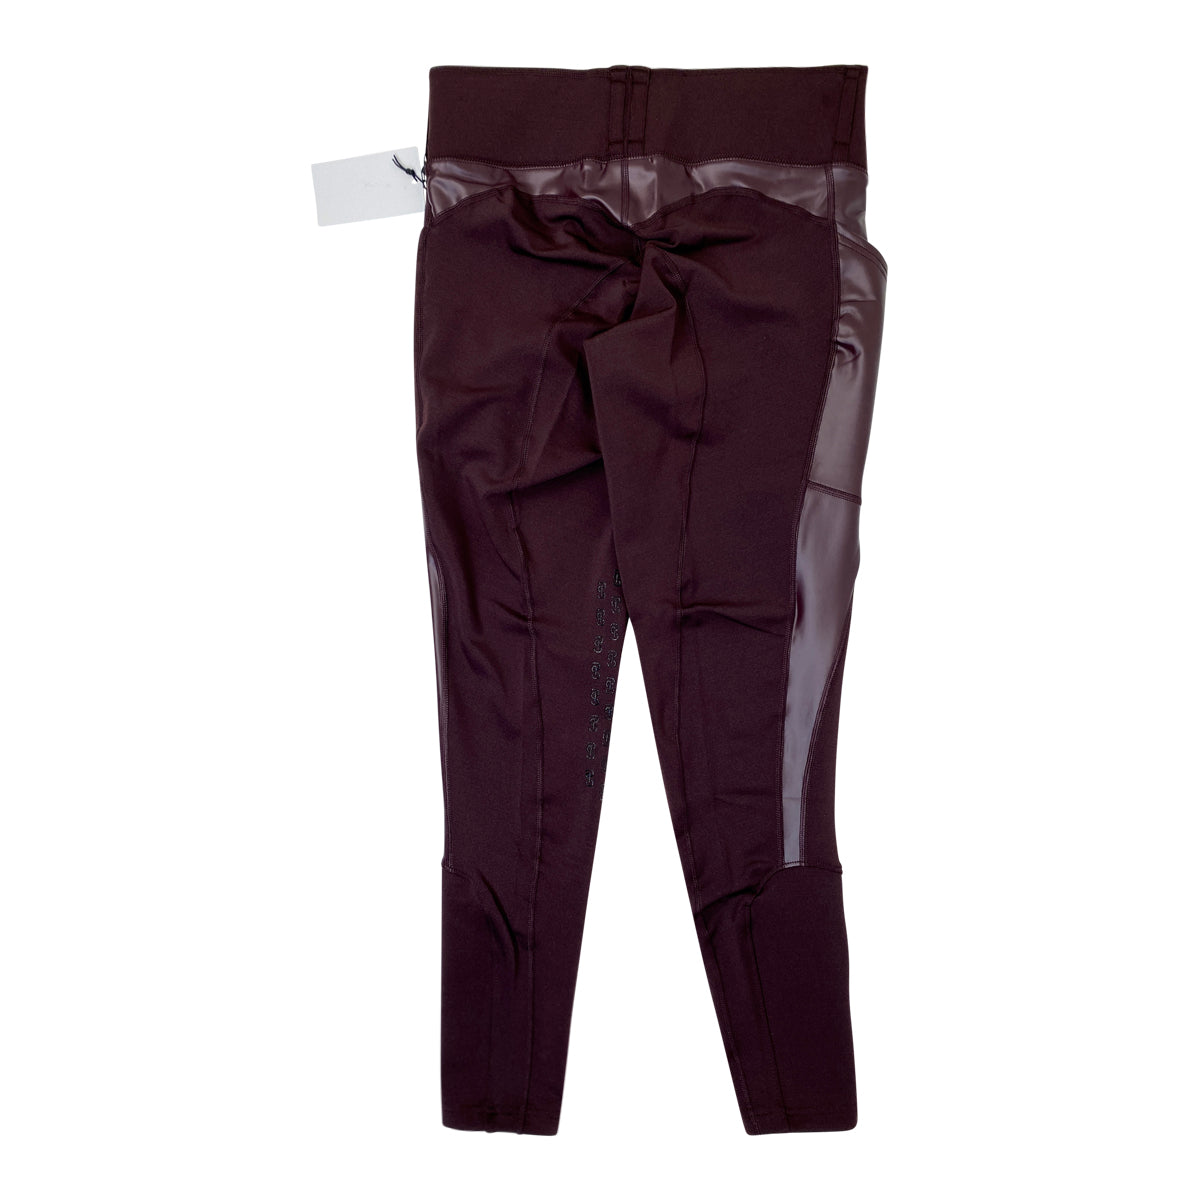 PS of Sweden 'Helena' Tights in Wine